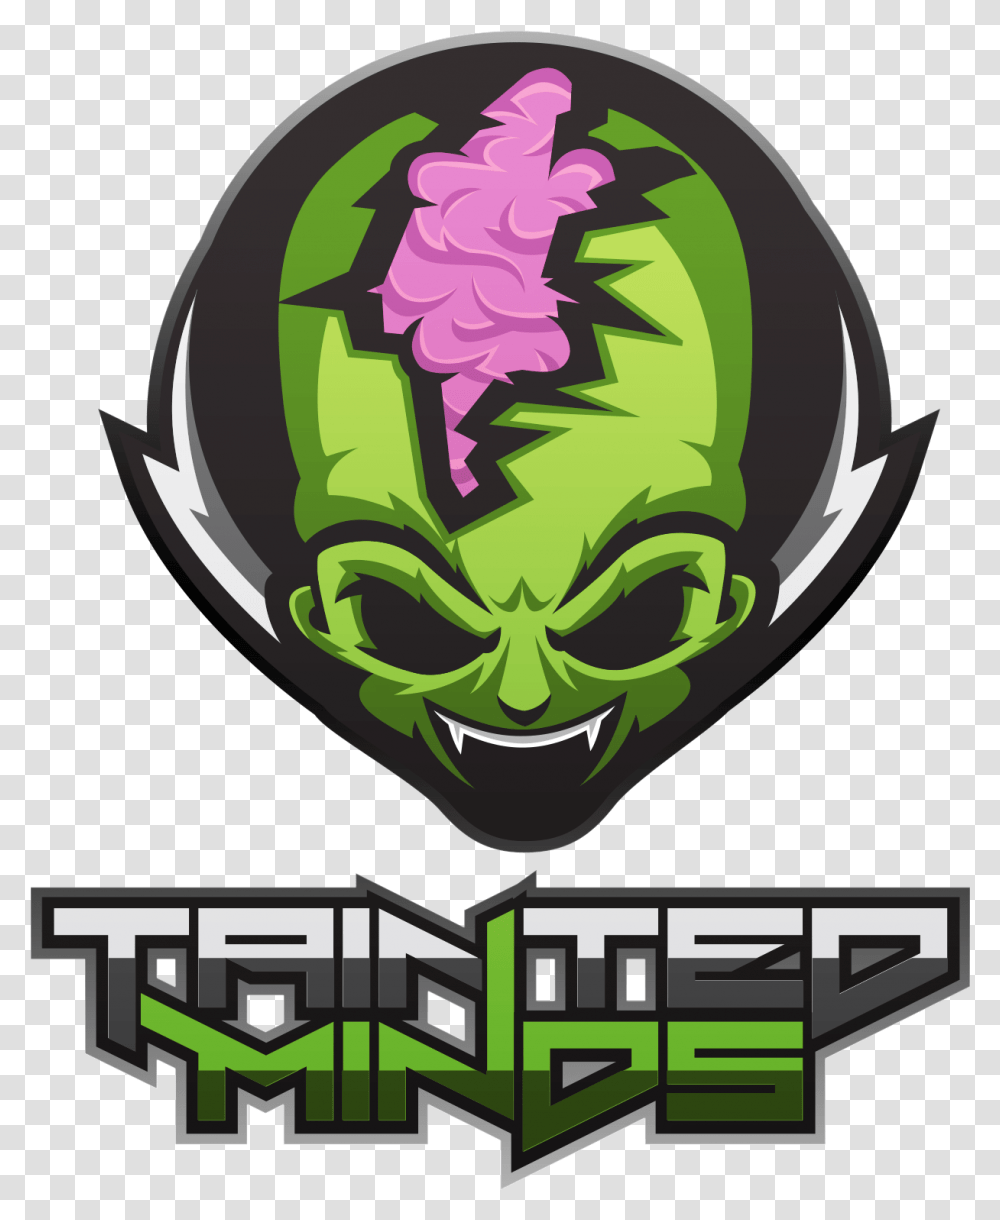 Aw 1v1 Ffa Tainted Minds Csgo, Poster, Advertisement Transparent Png